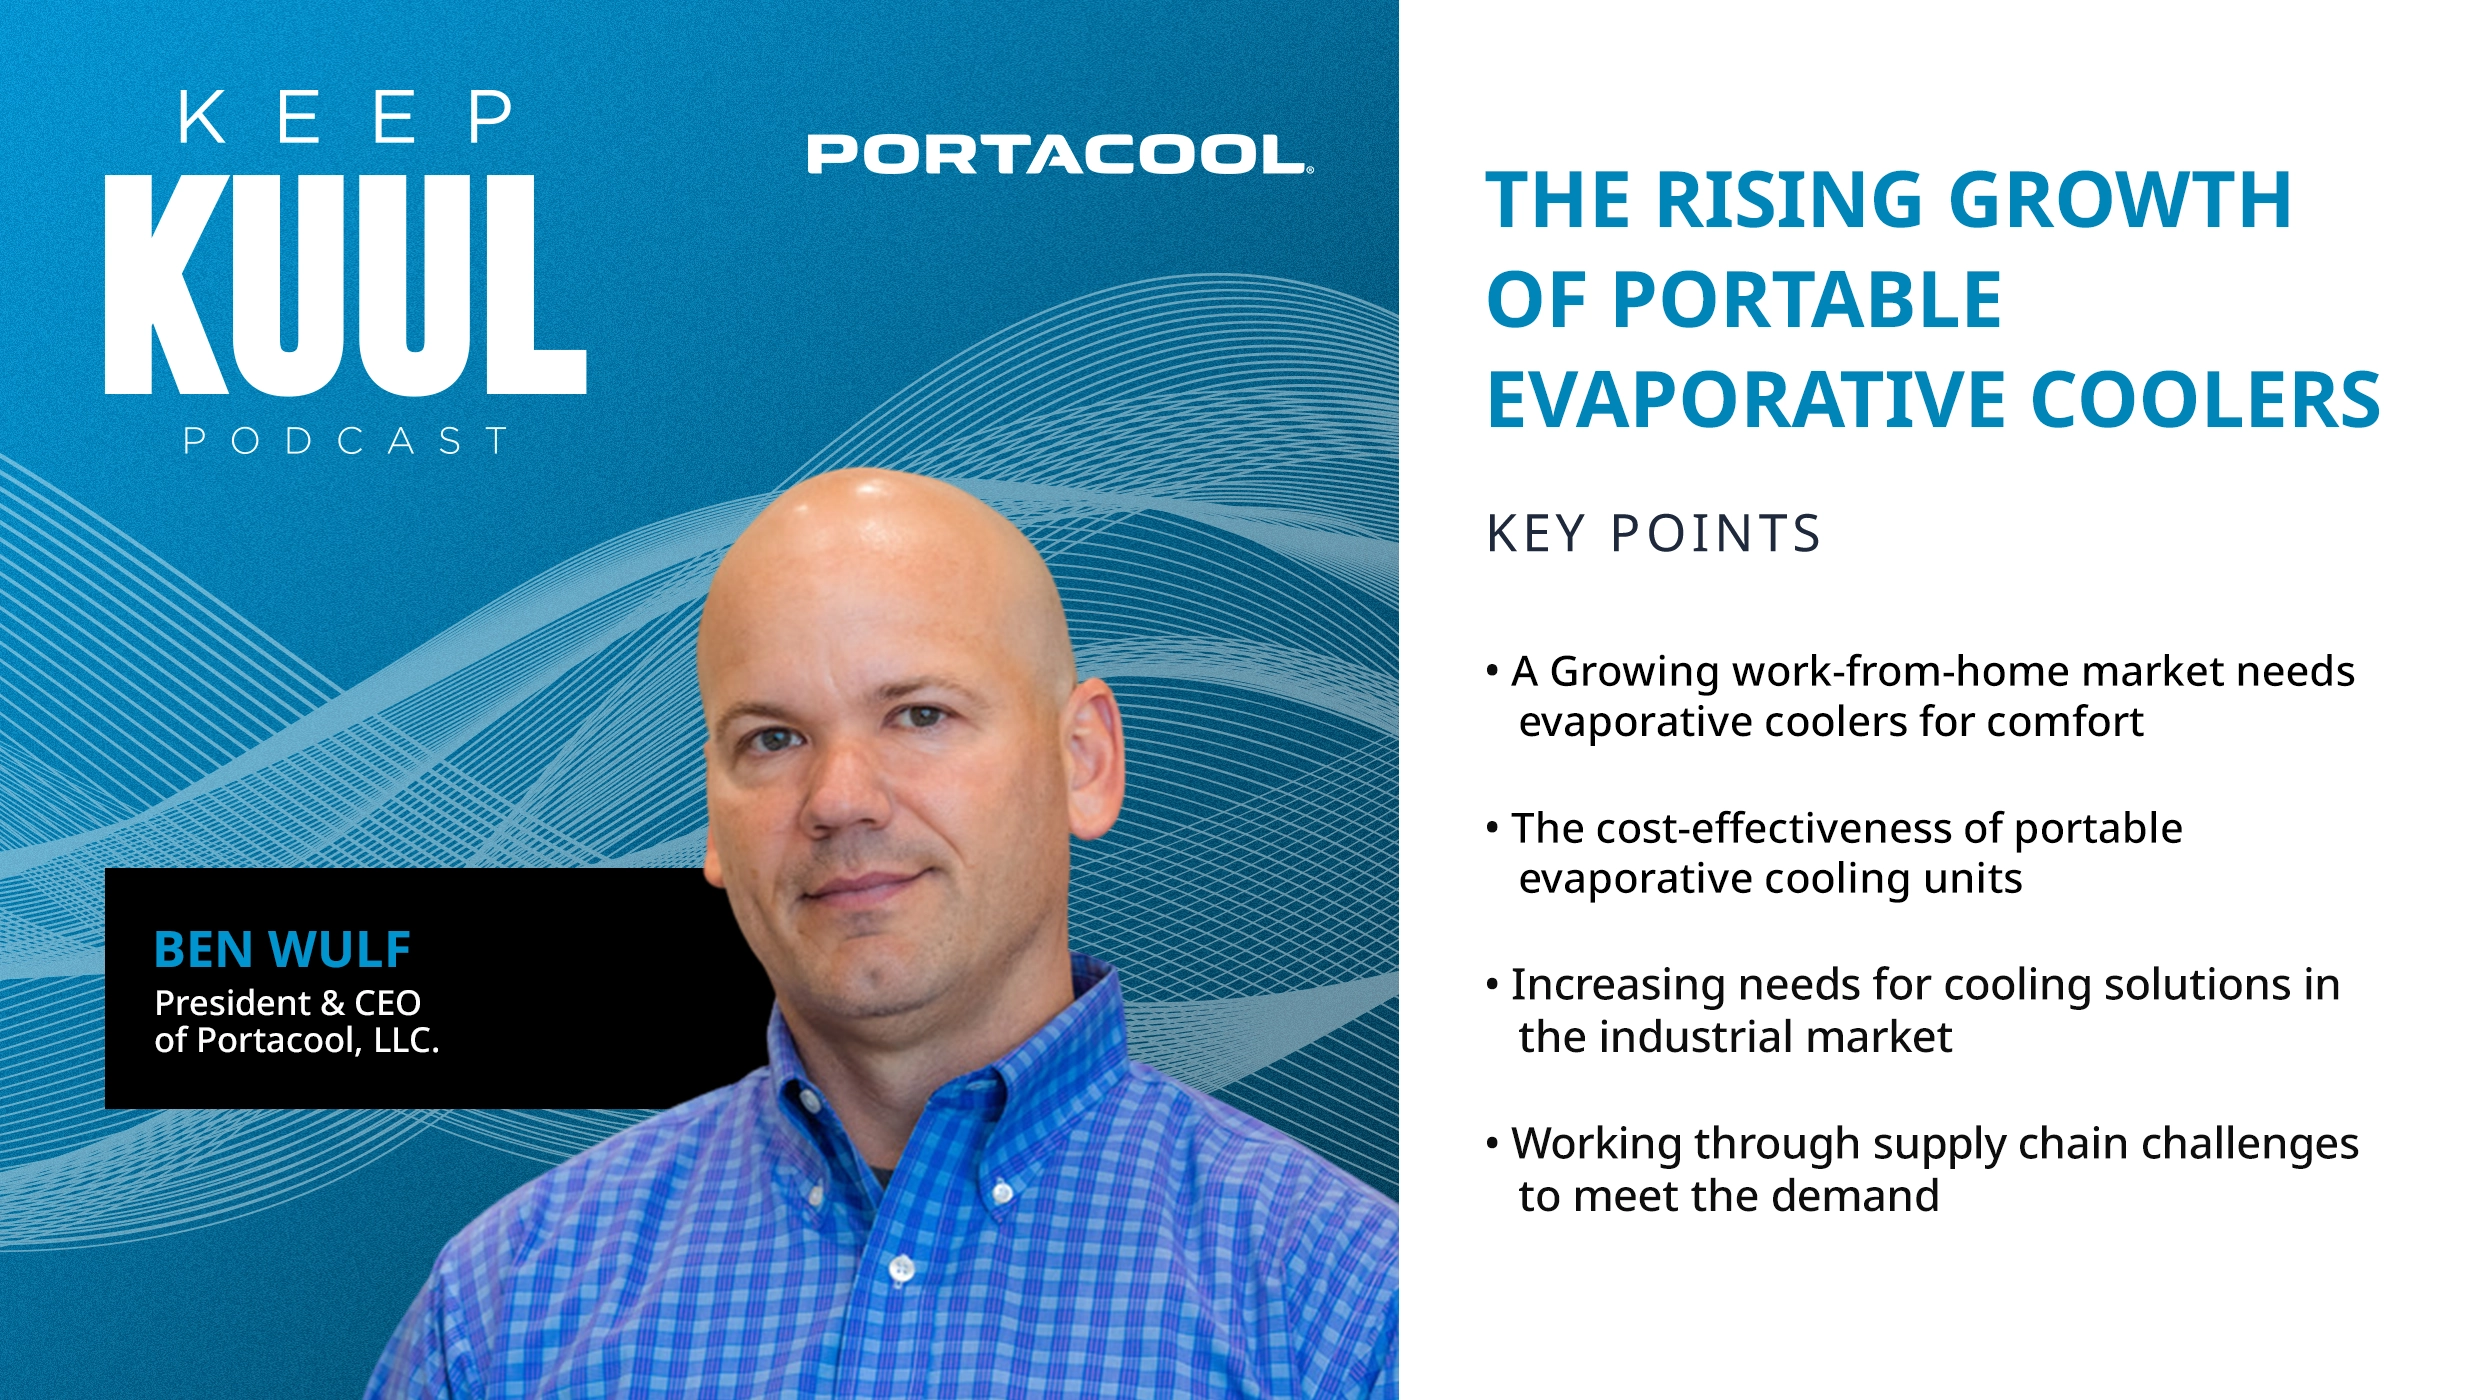 The Rising Growth of Portable Evaporative Coolers